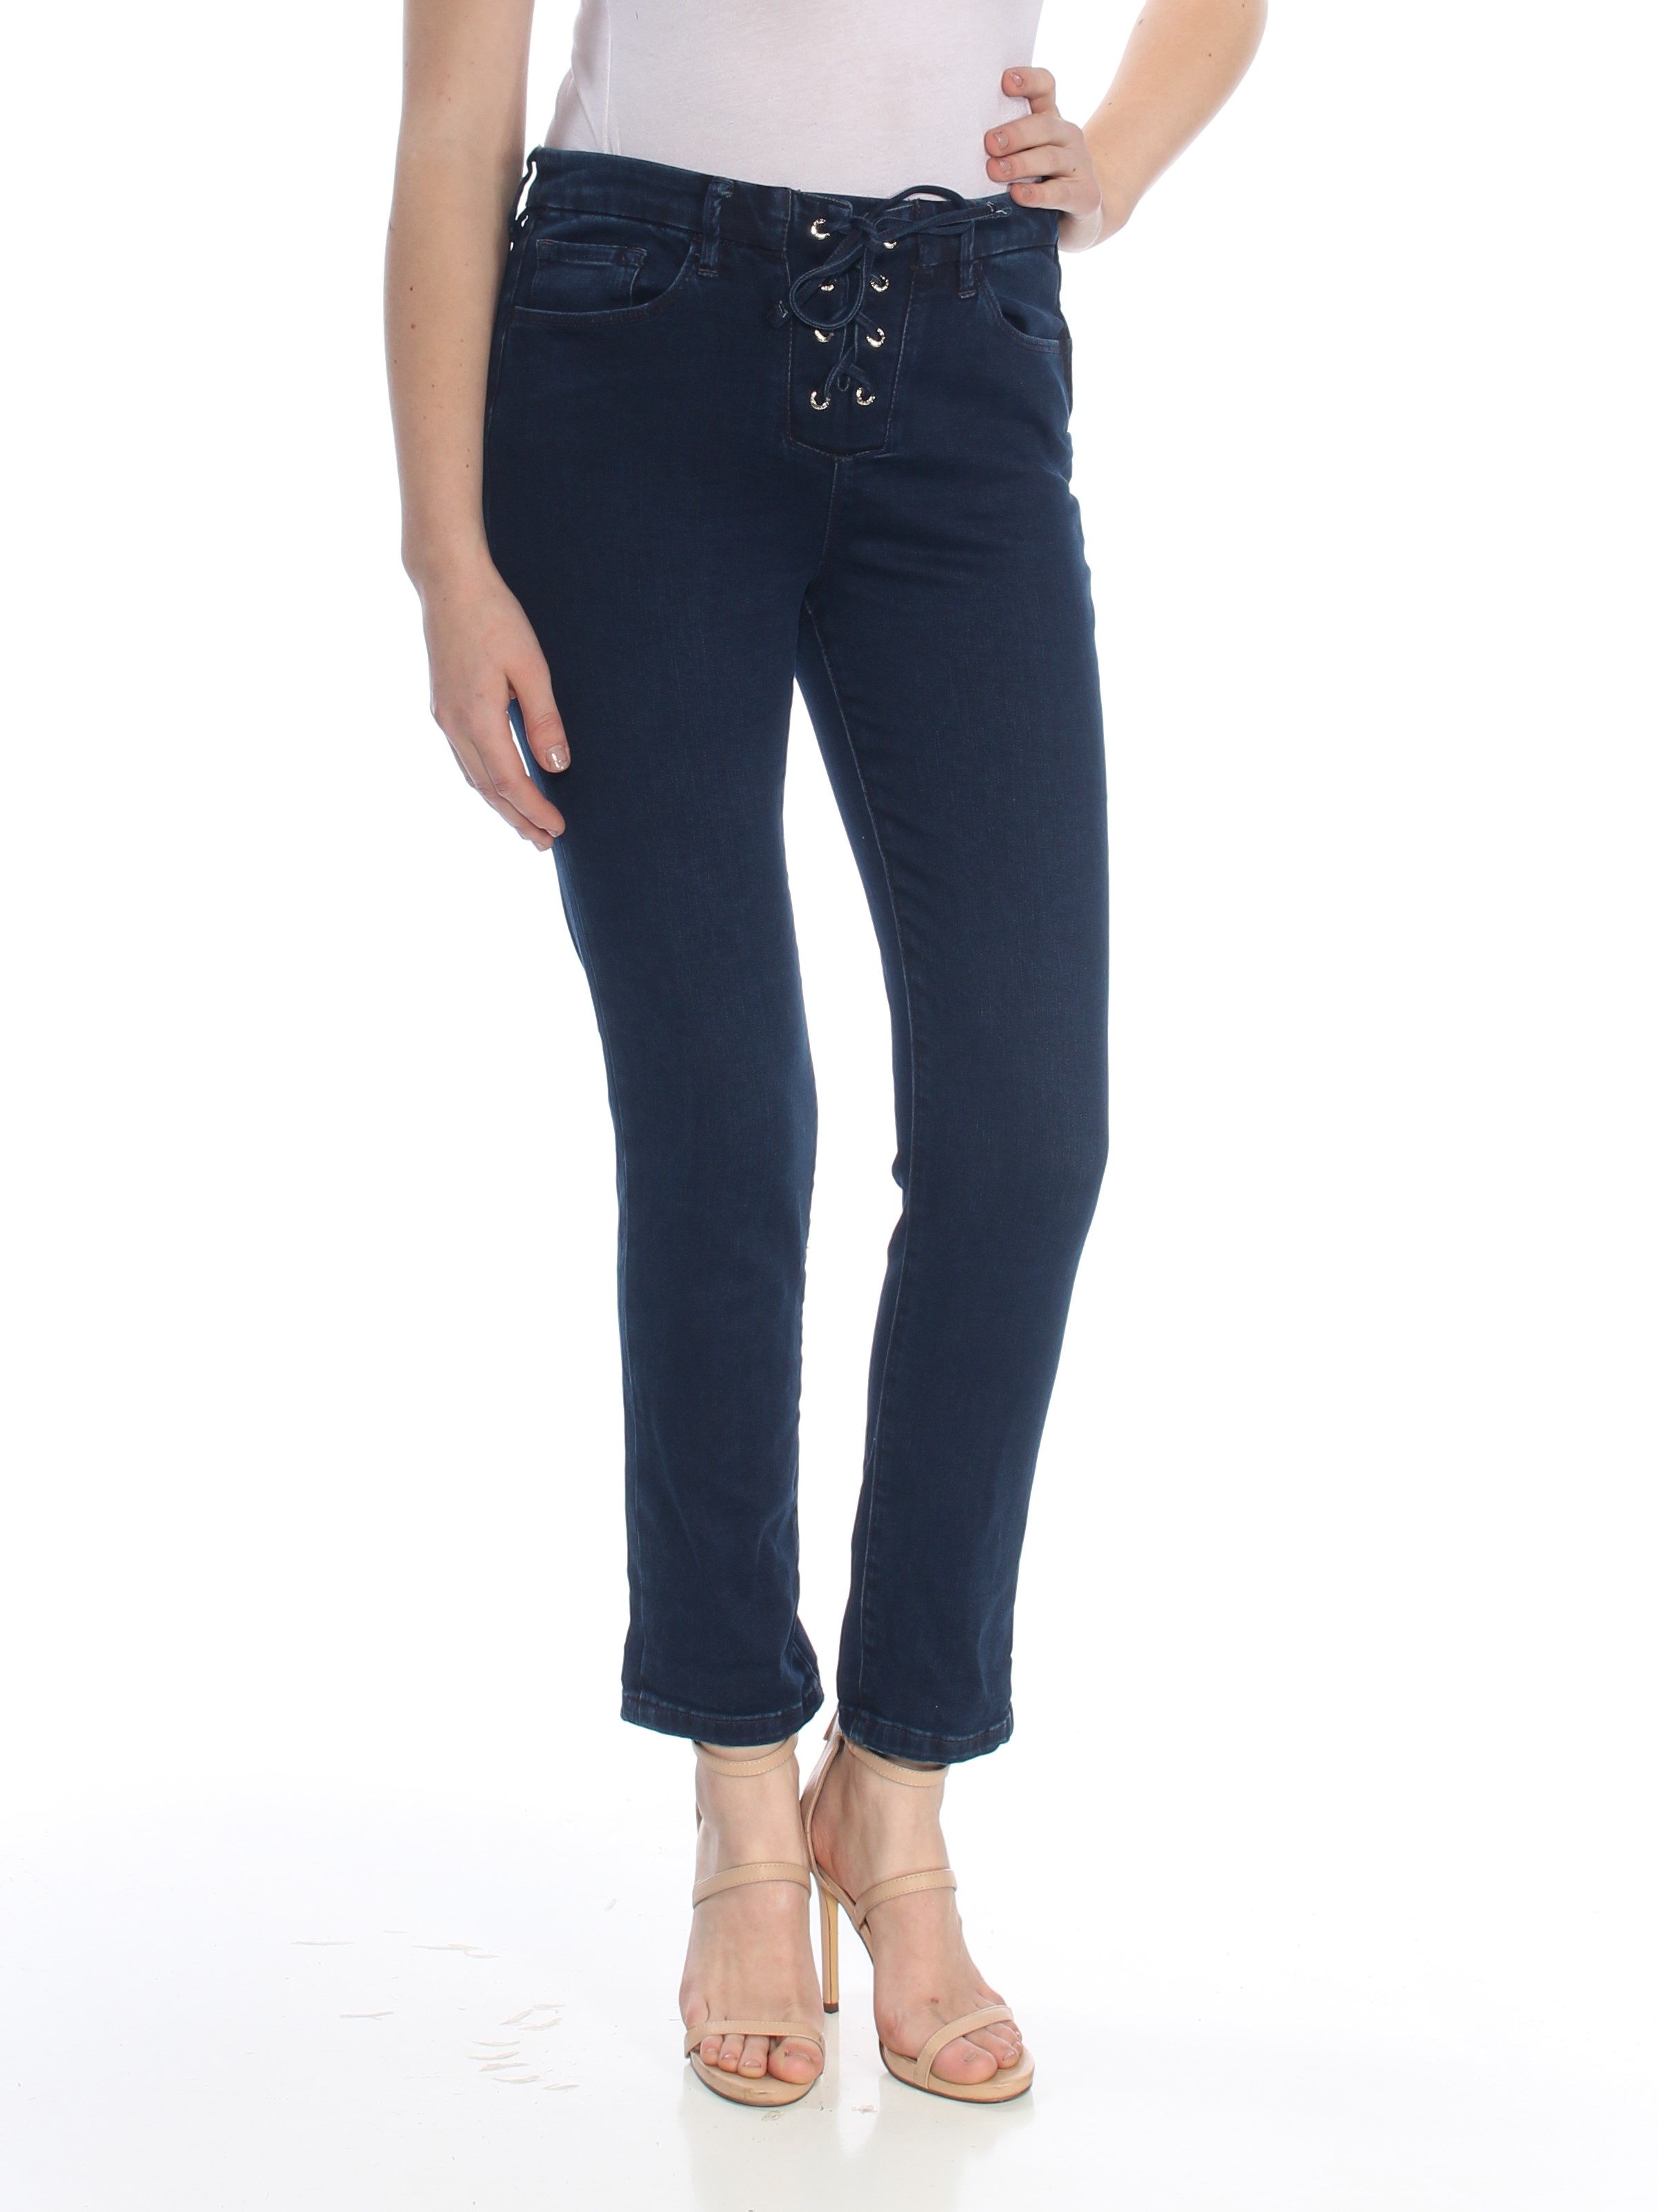 TOMMY HILFIGER Womens Navy Lace Up Cuffed Jeans 6